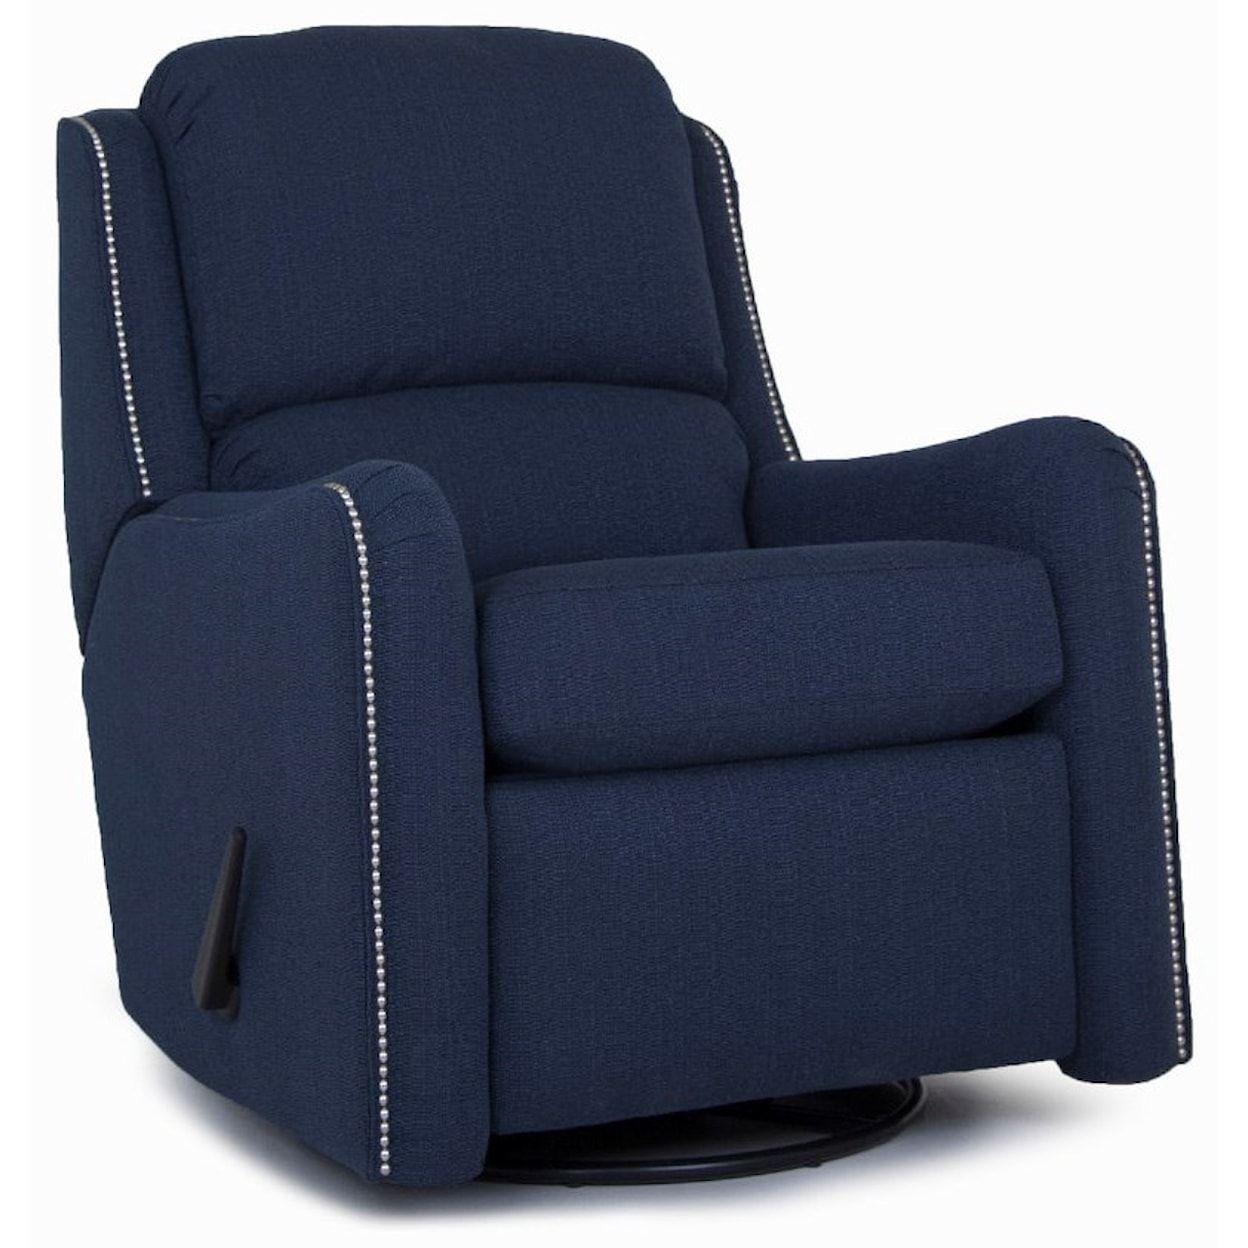 Smith Brothers 746 Power Recliner